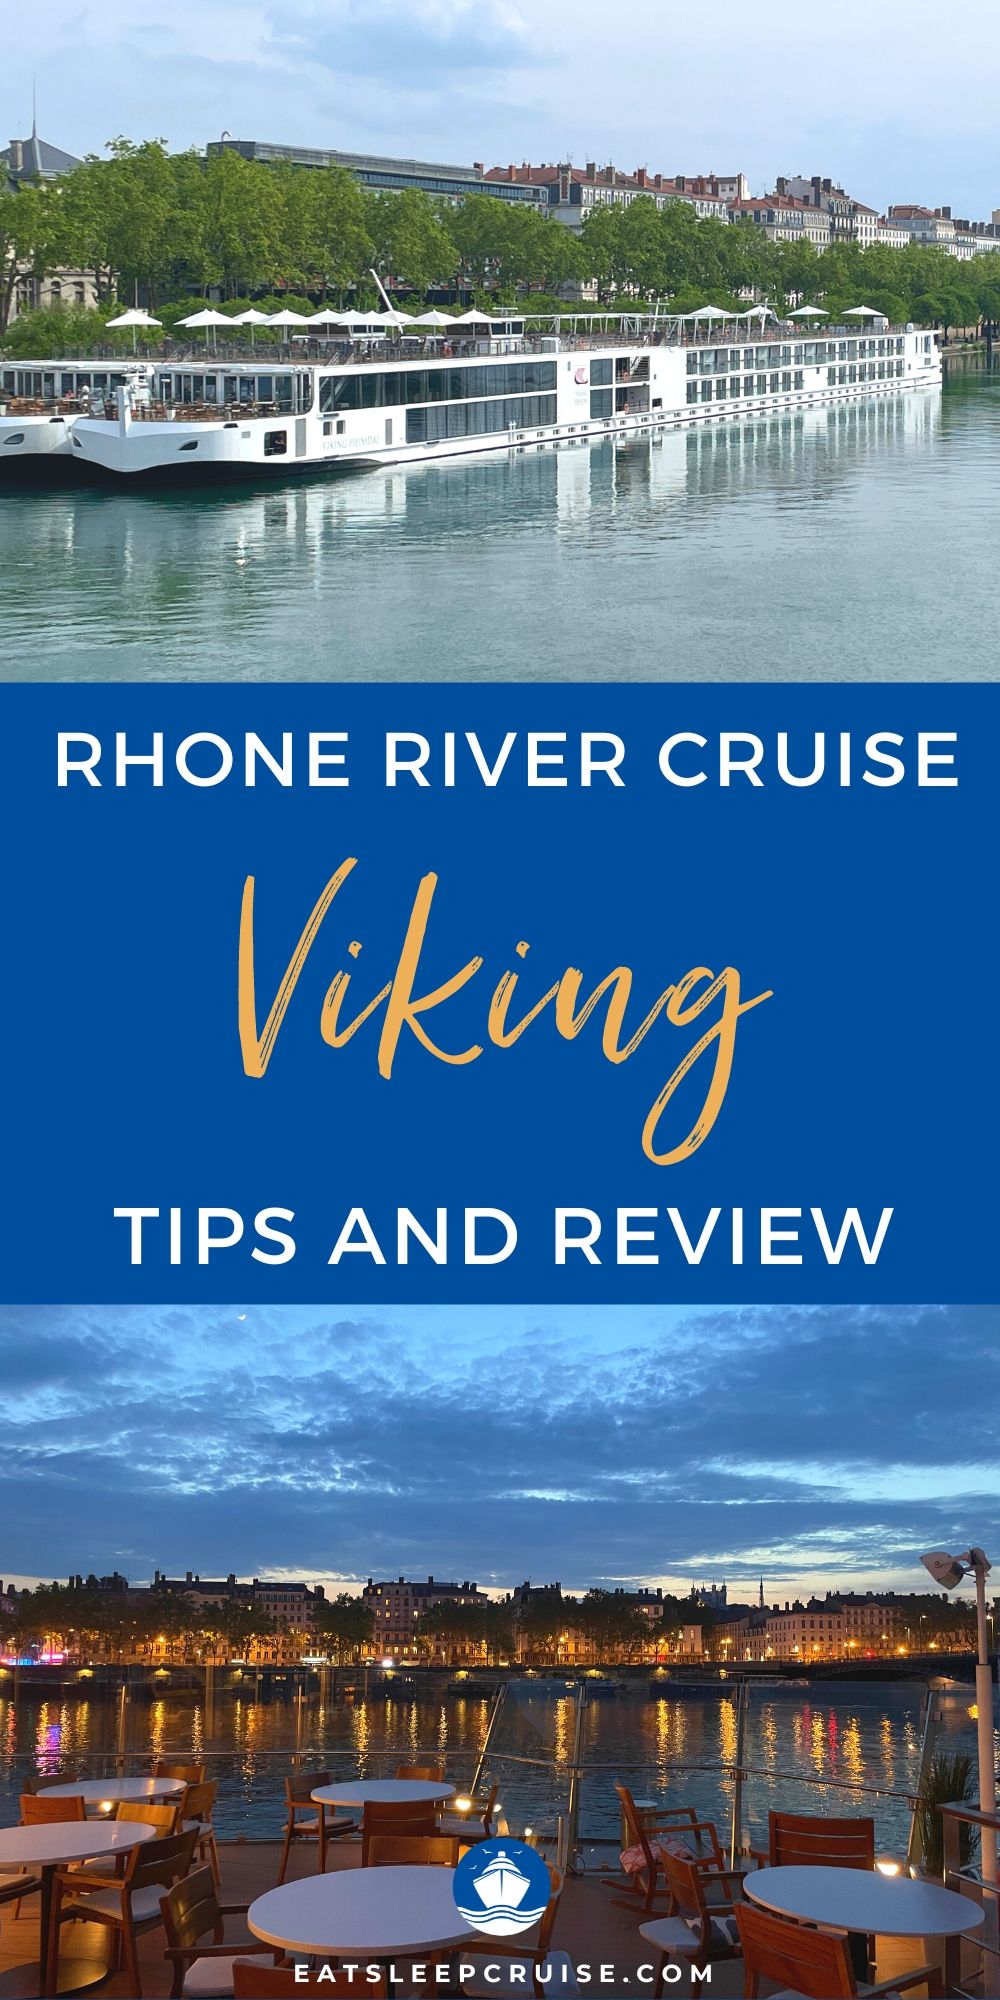 A Rhone River Cruise Review on Viking Hermod